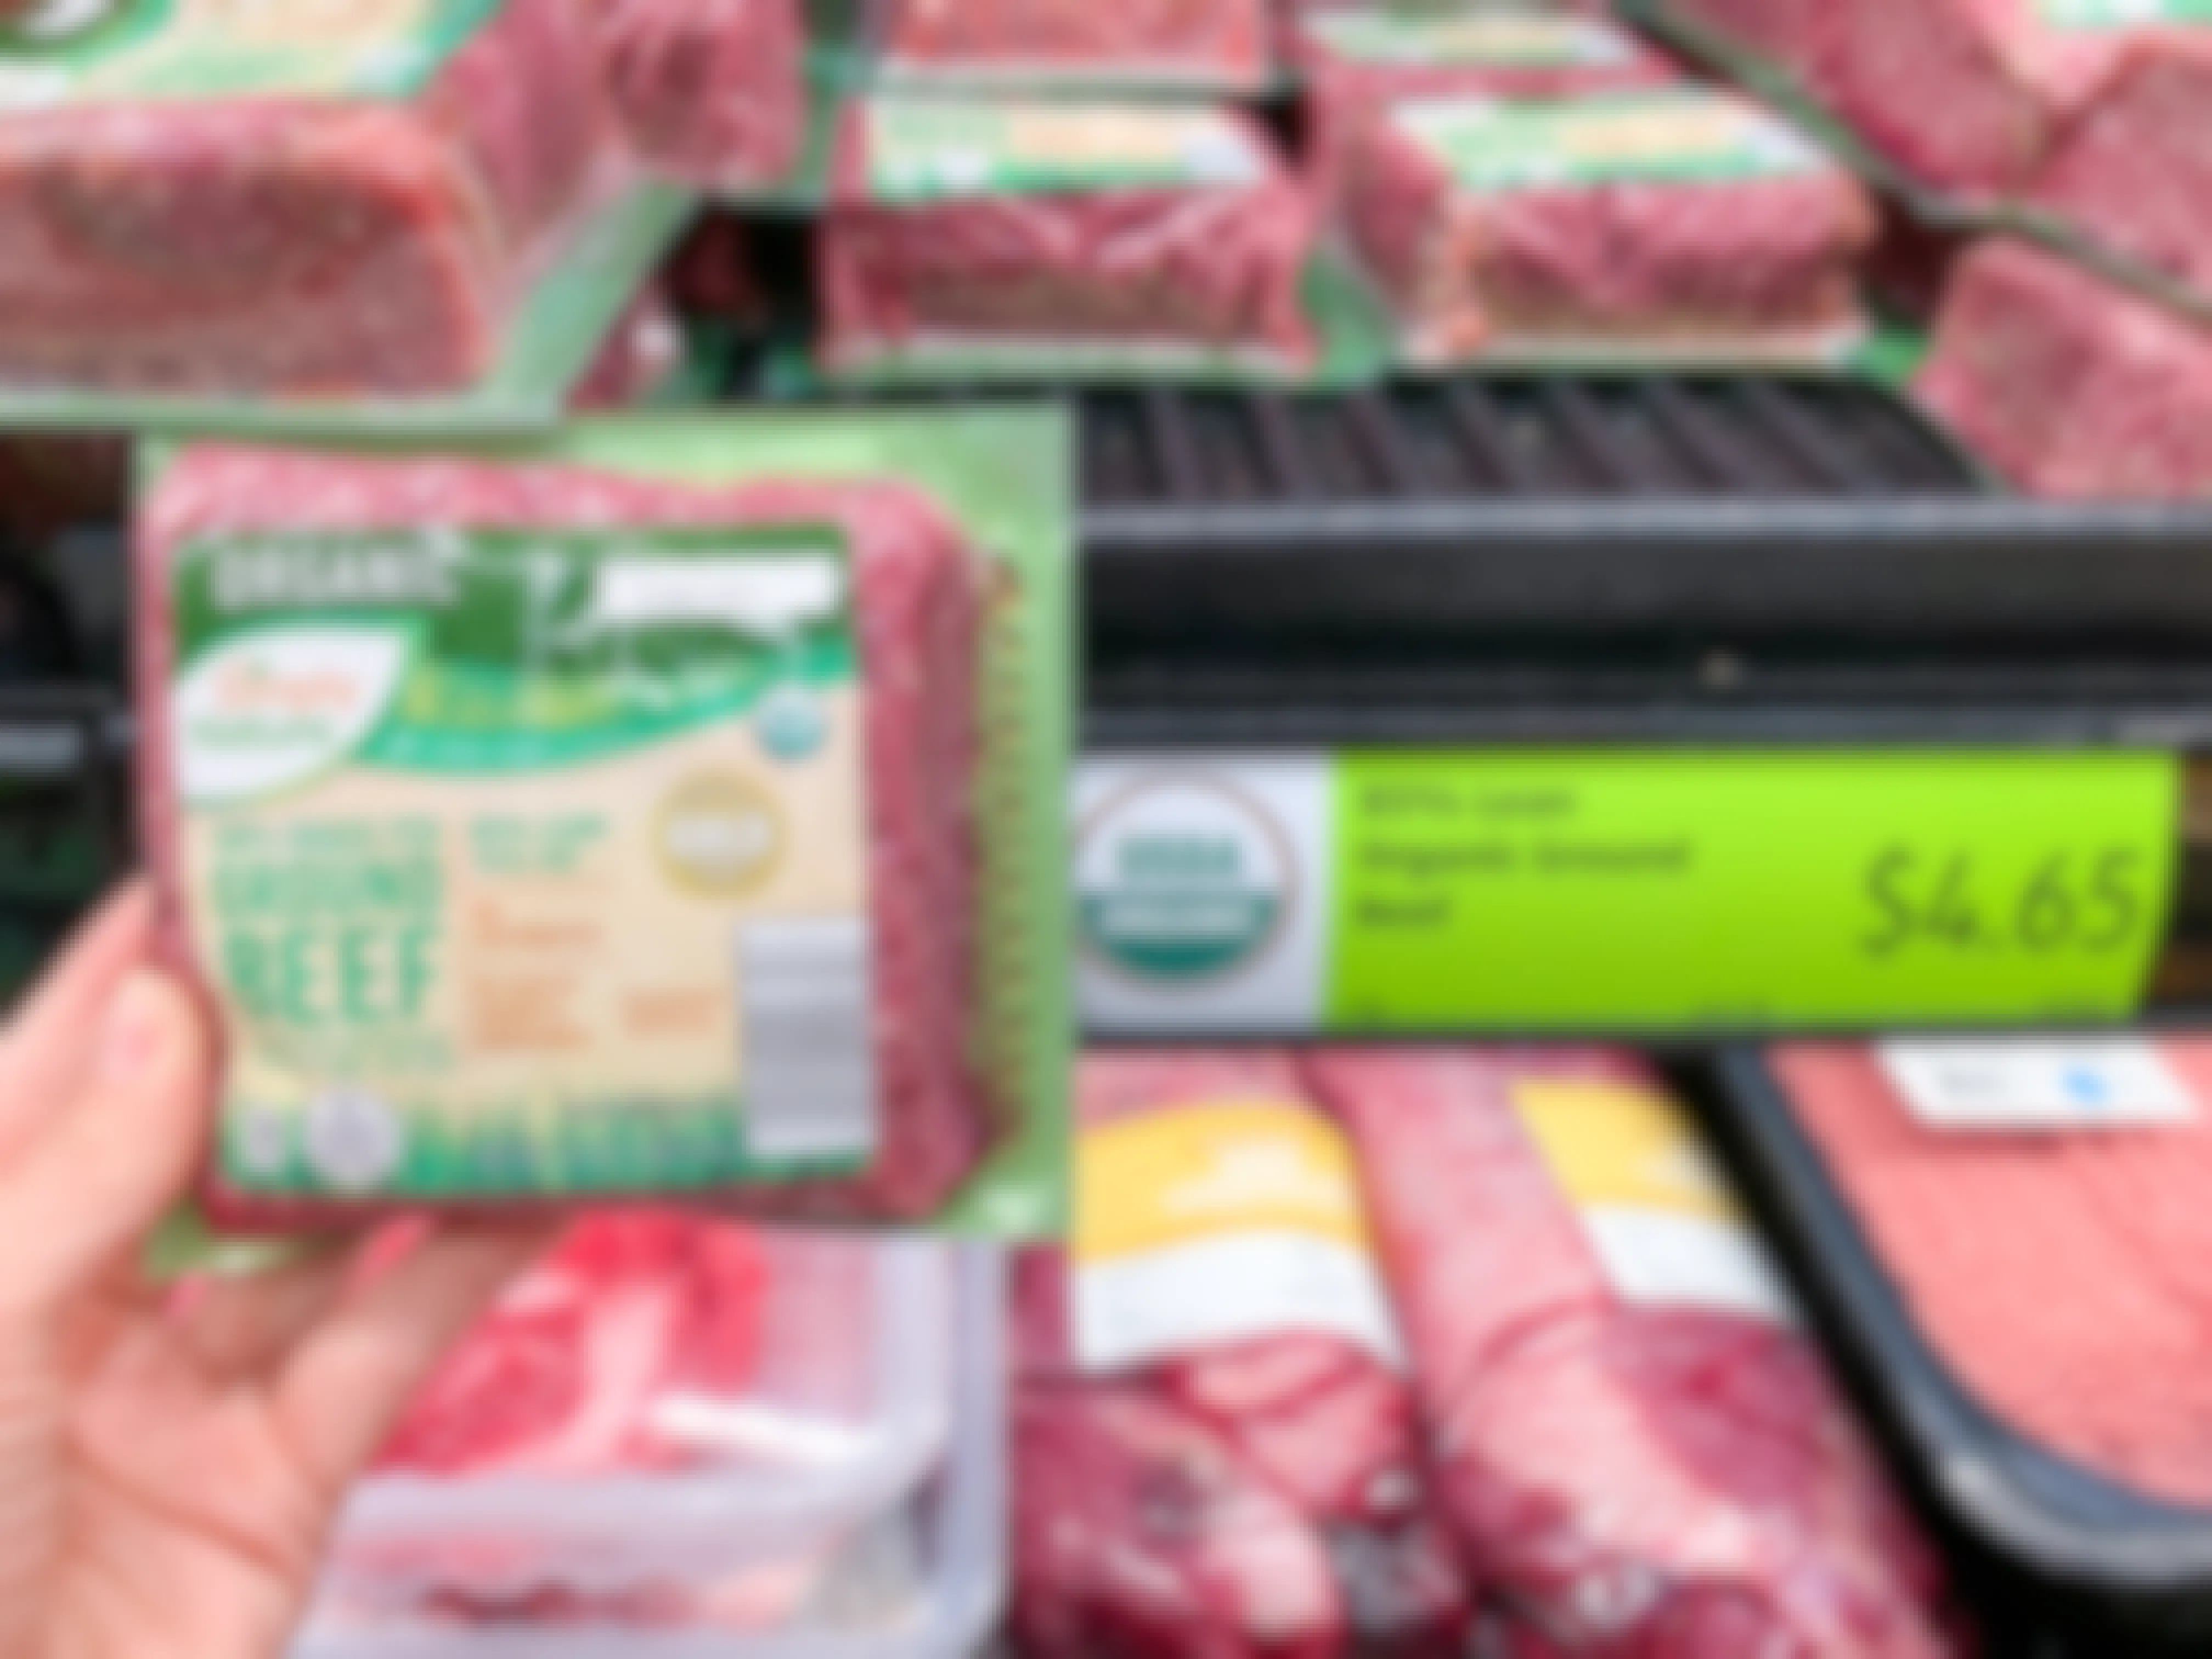 Organic Simply Nature grass fed beef at Aldi